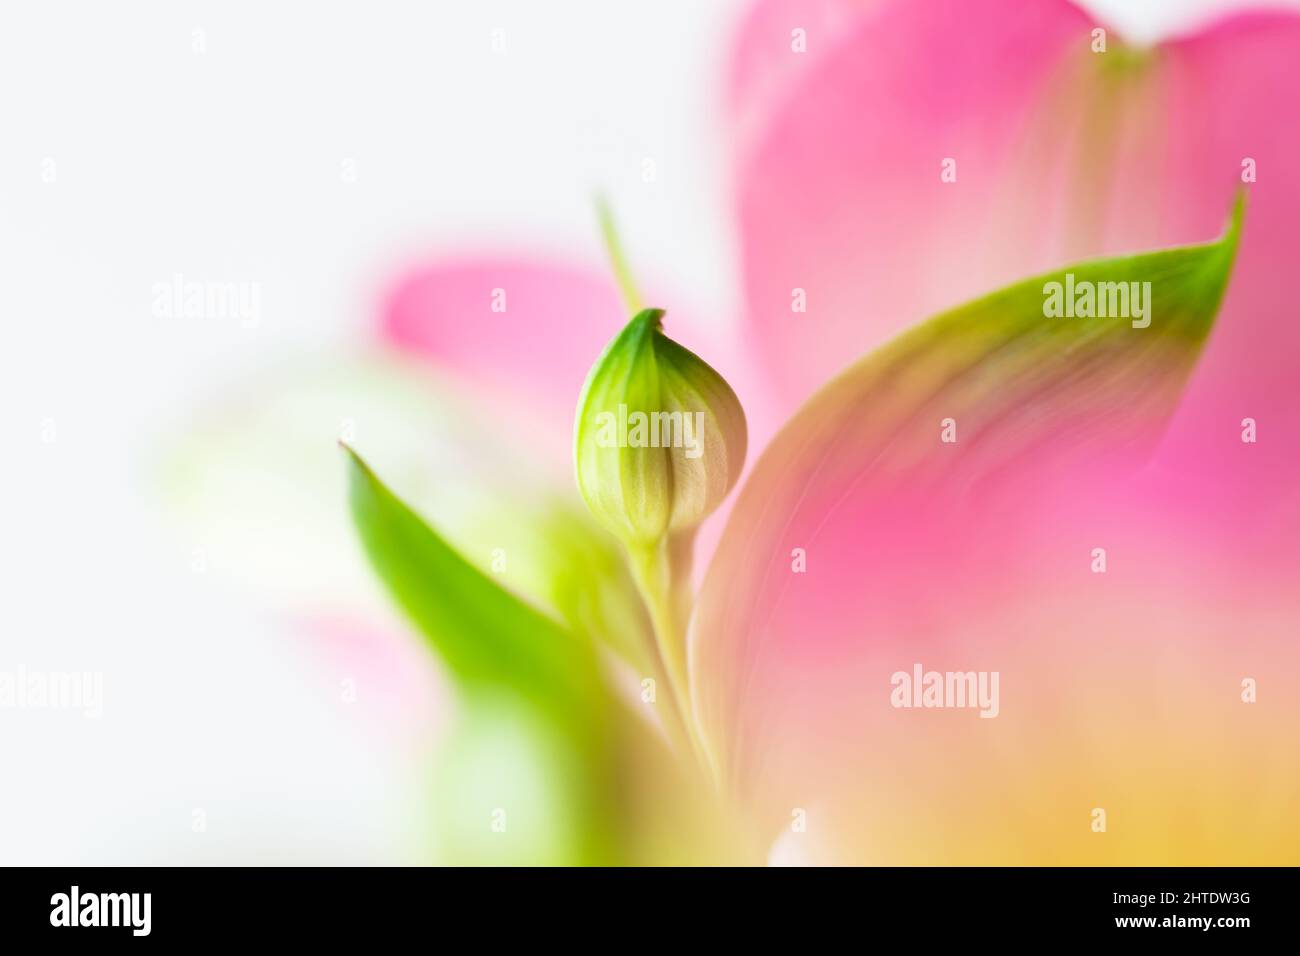 Abstract flower blurred defocused background with pink Lily of Incas or Alstroemeria. Selective focus. Copy space for text. Spring or beauty concept. Stock Photo